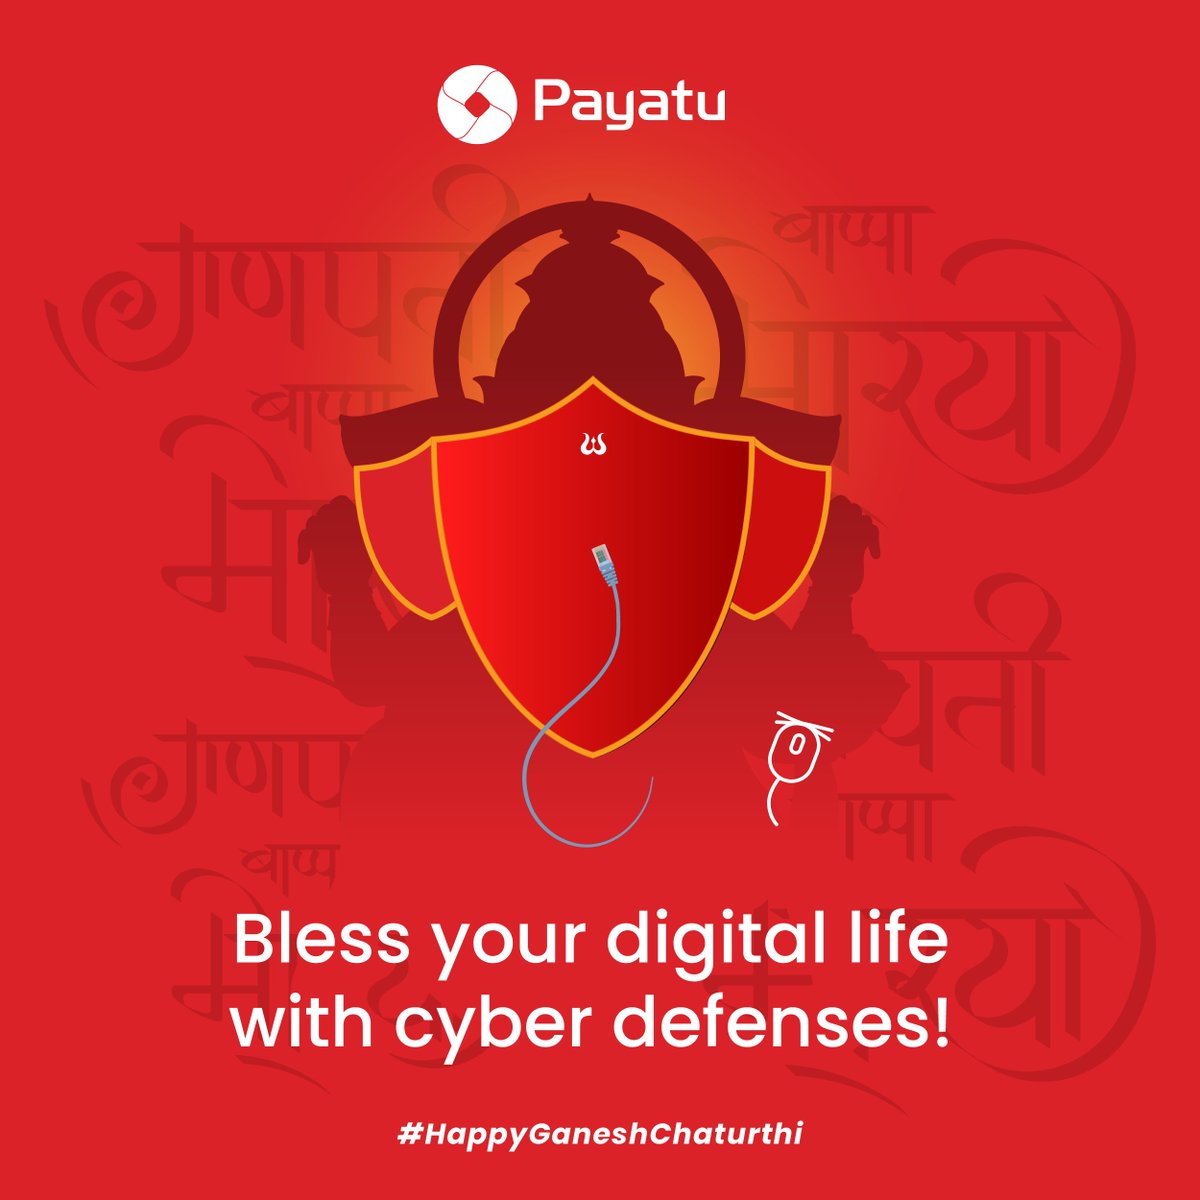 🙏✨ Happy Ganesh Chaturthi! 🌺

On this auspicious occasion, let us seek the divine blessings of Lord Ganesha for the wisdom to safeguard our invaluable data, just as he protects us from life's obstacles. 🐘💻

Wishing you a joyful and blessed #GaneshChaturthi🪔

#InfoSec #xIoT